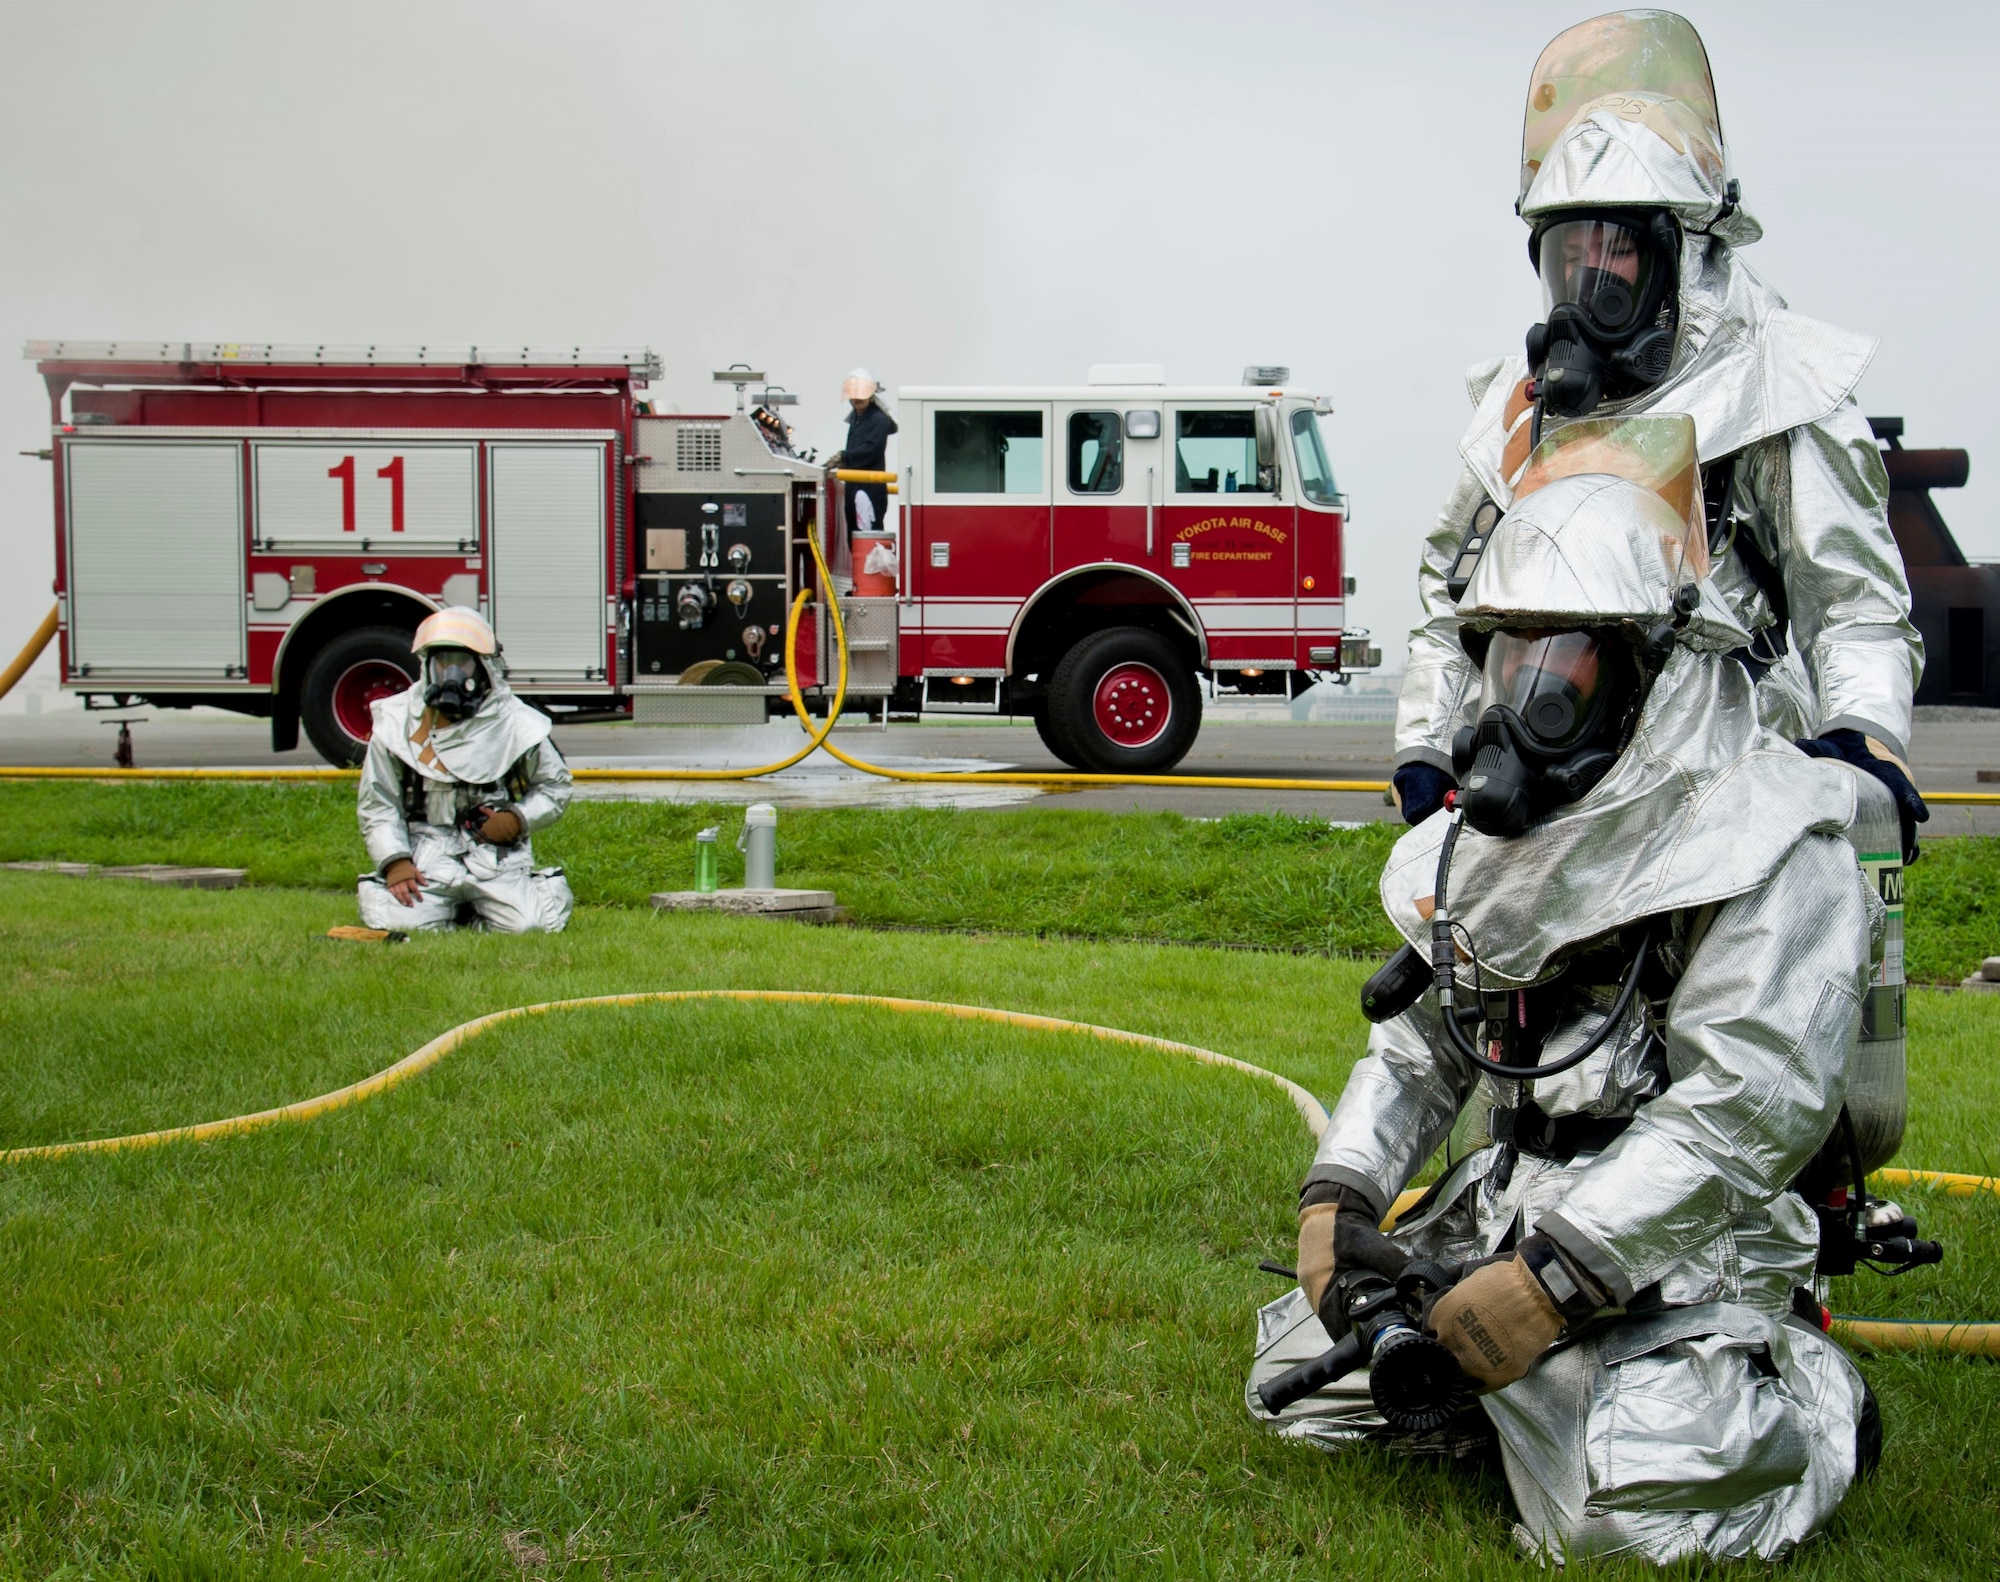 Firefighters from Yokota Air Base, Japan, standby at the simulated flashover trainer during joint training with firefighters from Marine Corps Air Station Iwakuni July 30, 2013, at Yokota AB. The training involved educating and recognizing the signs of a flashover, which is incredibly dangerous to firefighters, in a controlled training environment. (U.S. Air Force photo/Airman 1st Class Soo C. Kim) 